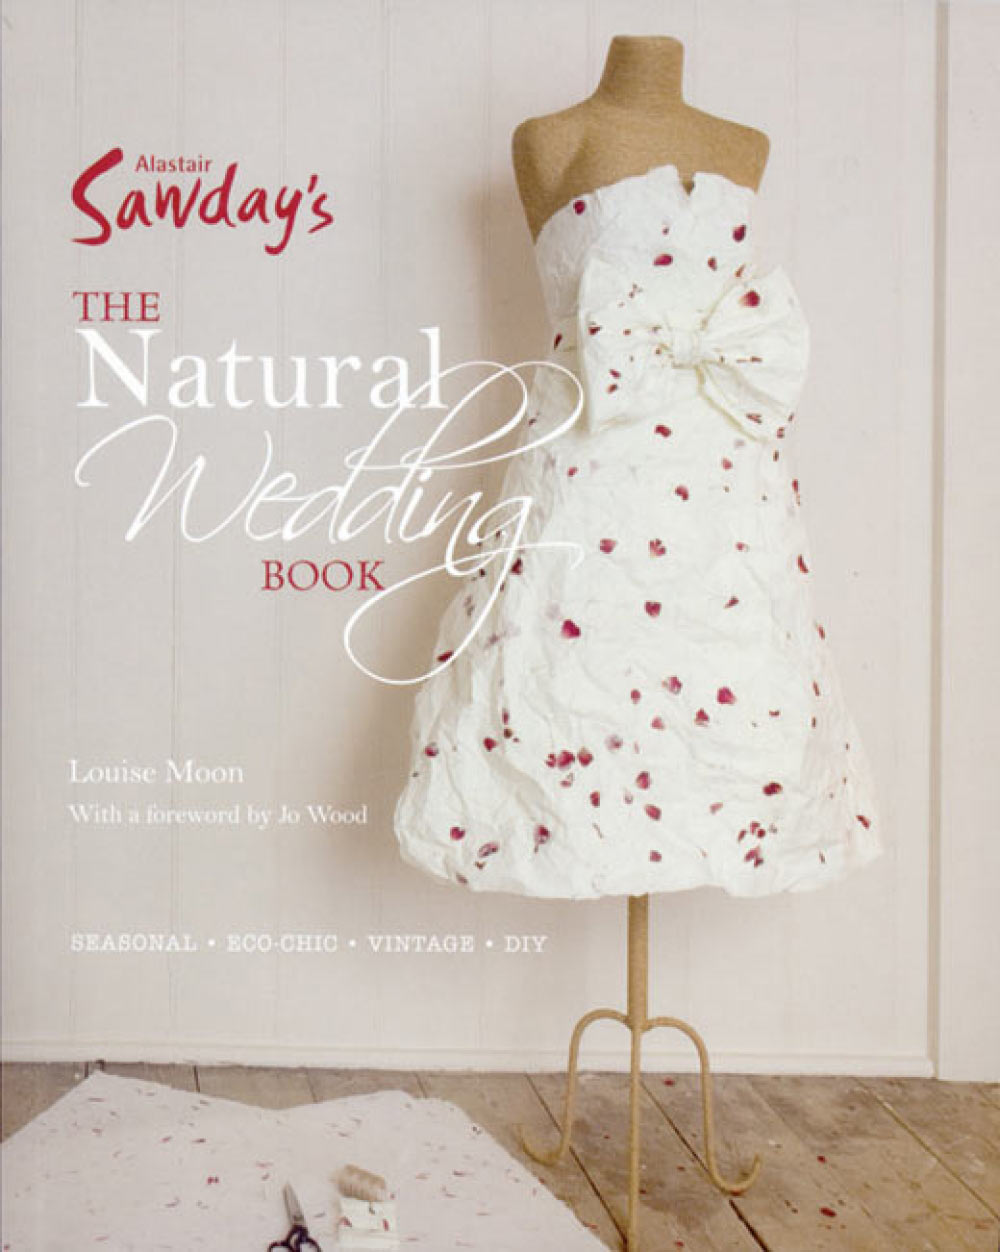 The Natural Wedding Book - OFFER!